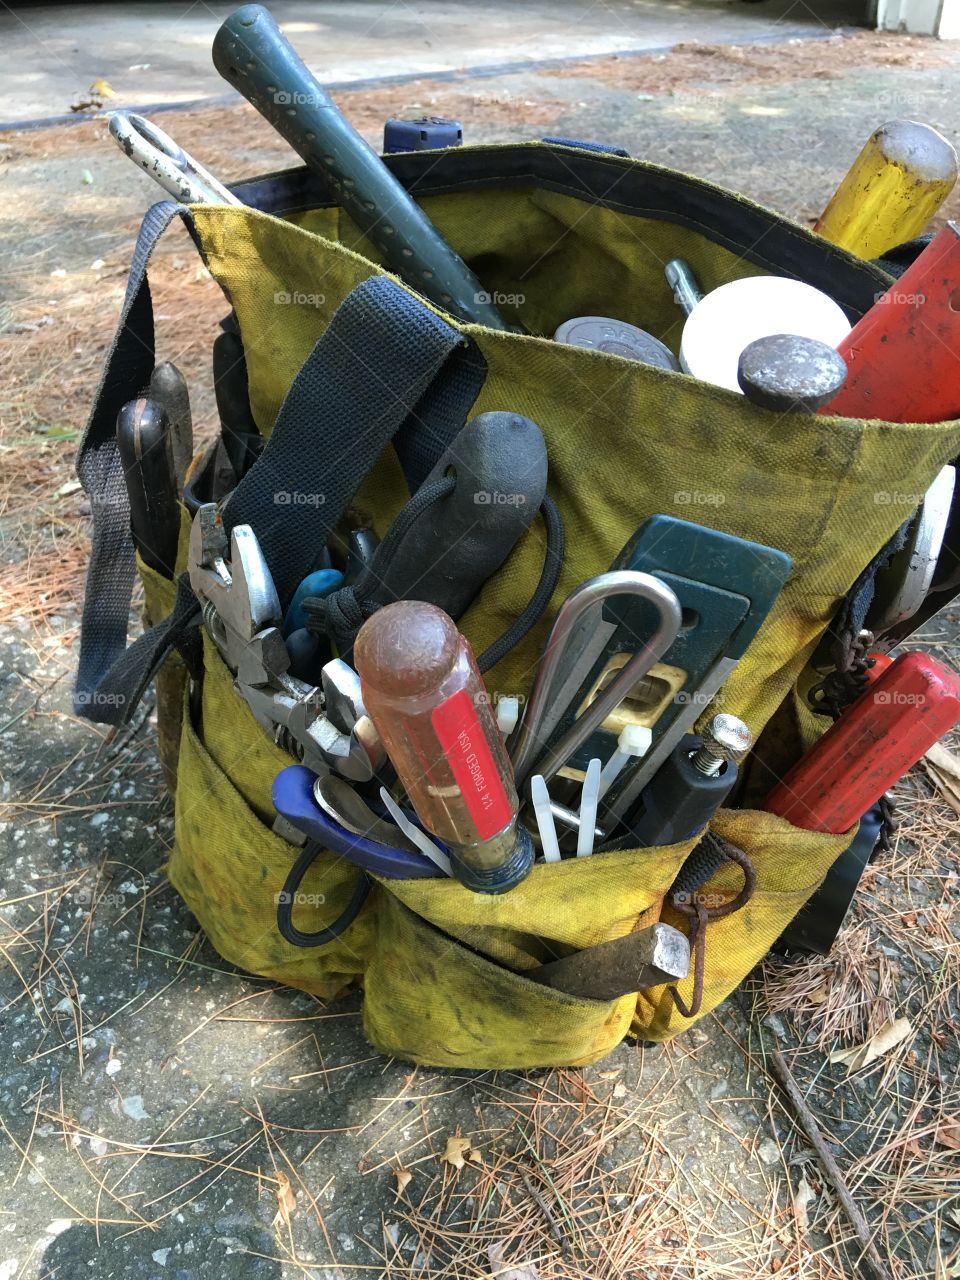 Canvas bucket of tools from above, large variety.
Plumbers employee tools needed for jobs.